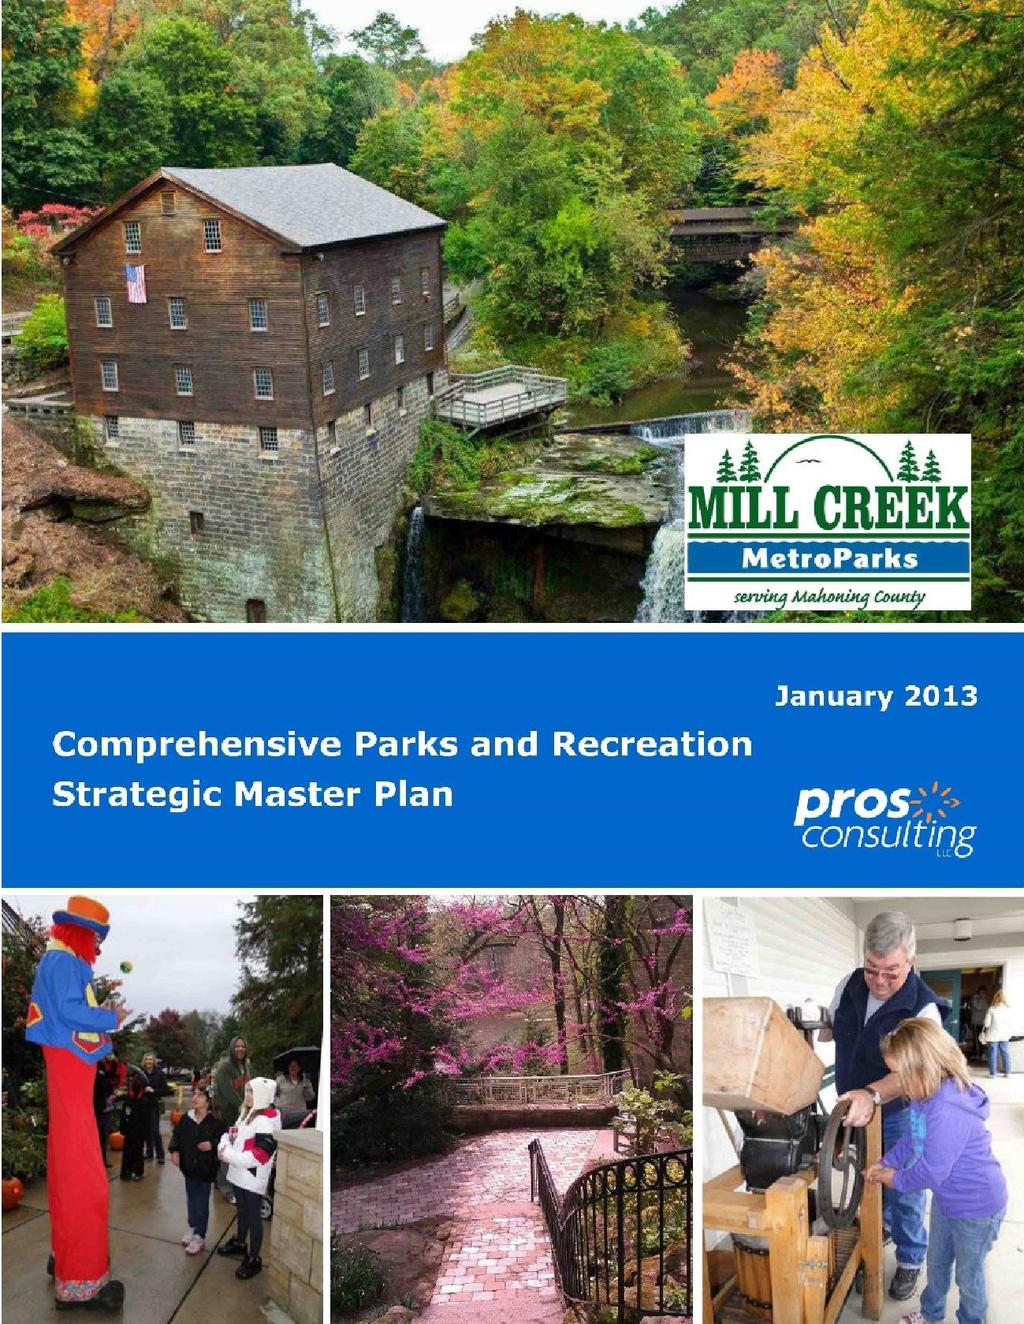 Strategic Master Plan Community Engagement Stewardship Our People Natural Resources Recreation & Education Infrastructure GOAL: Create an effective capital improvement and maintenance plan to